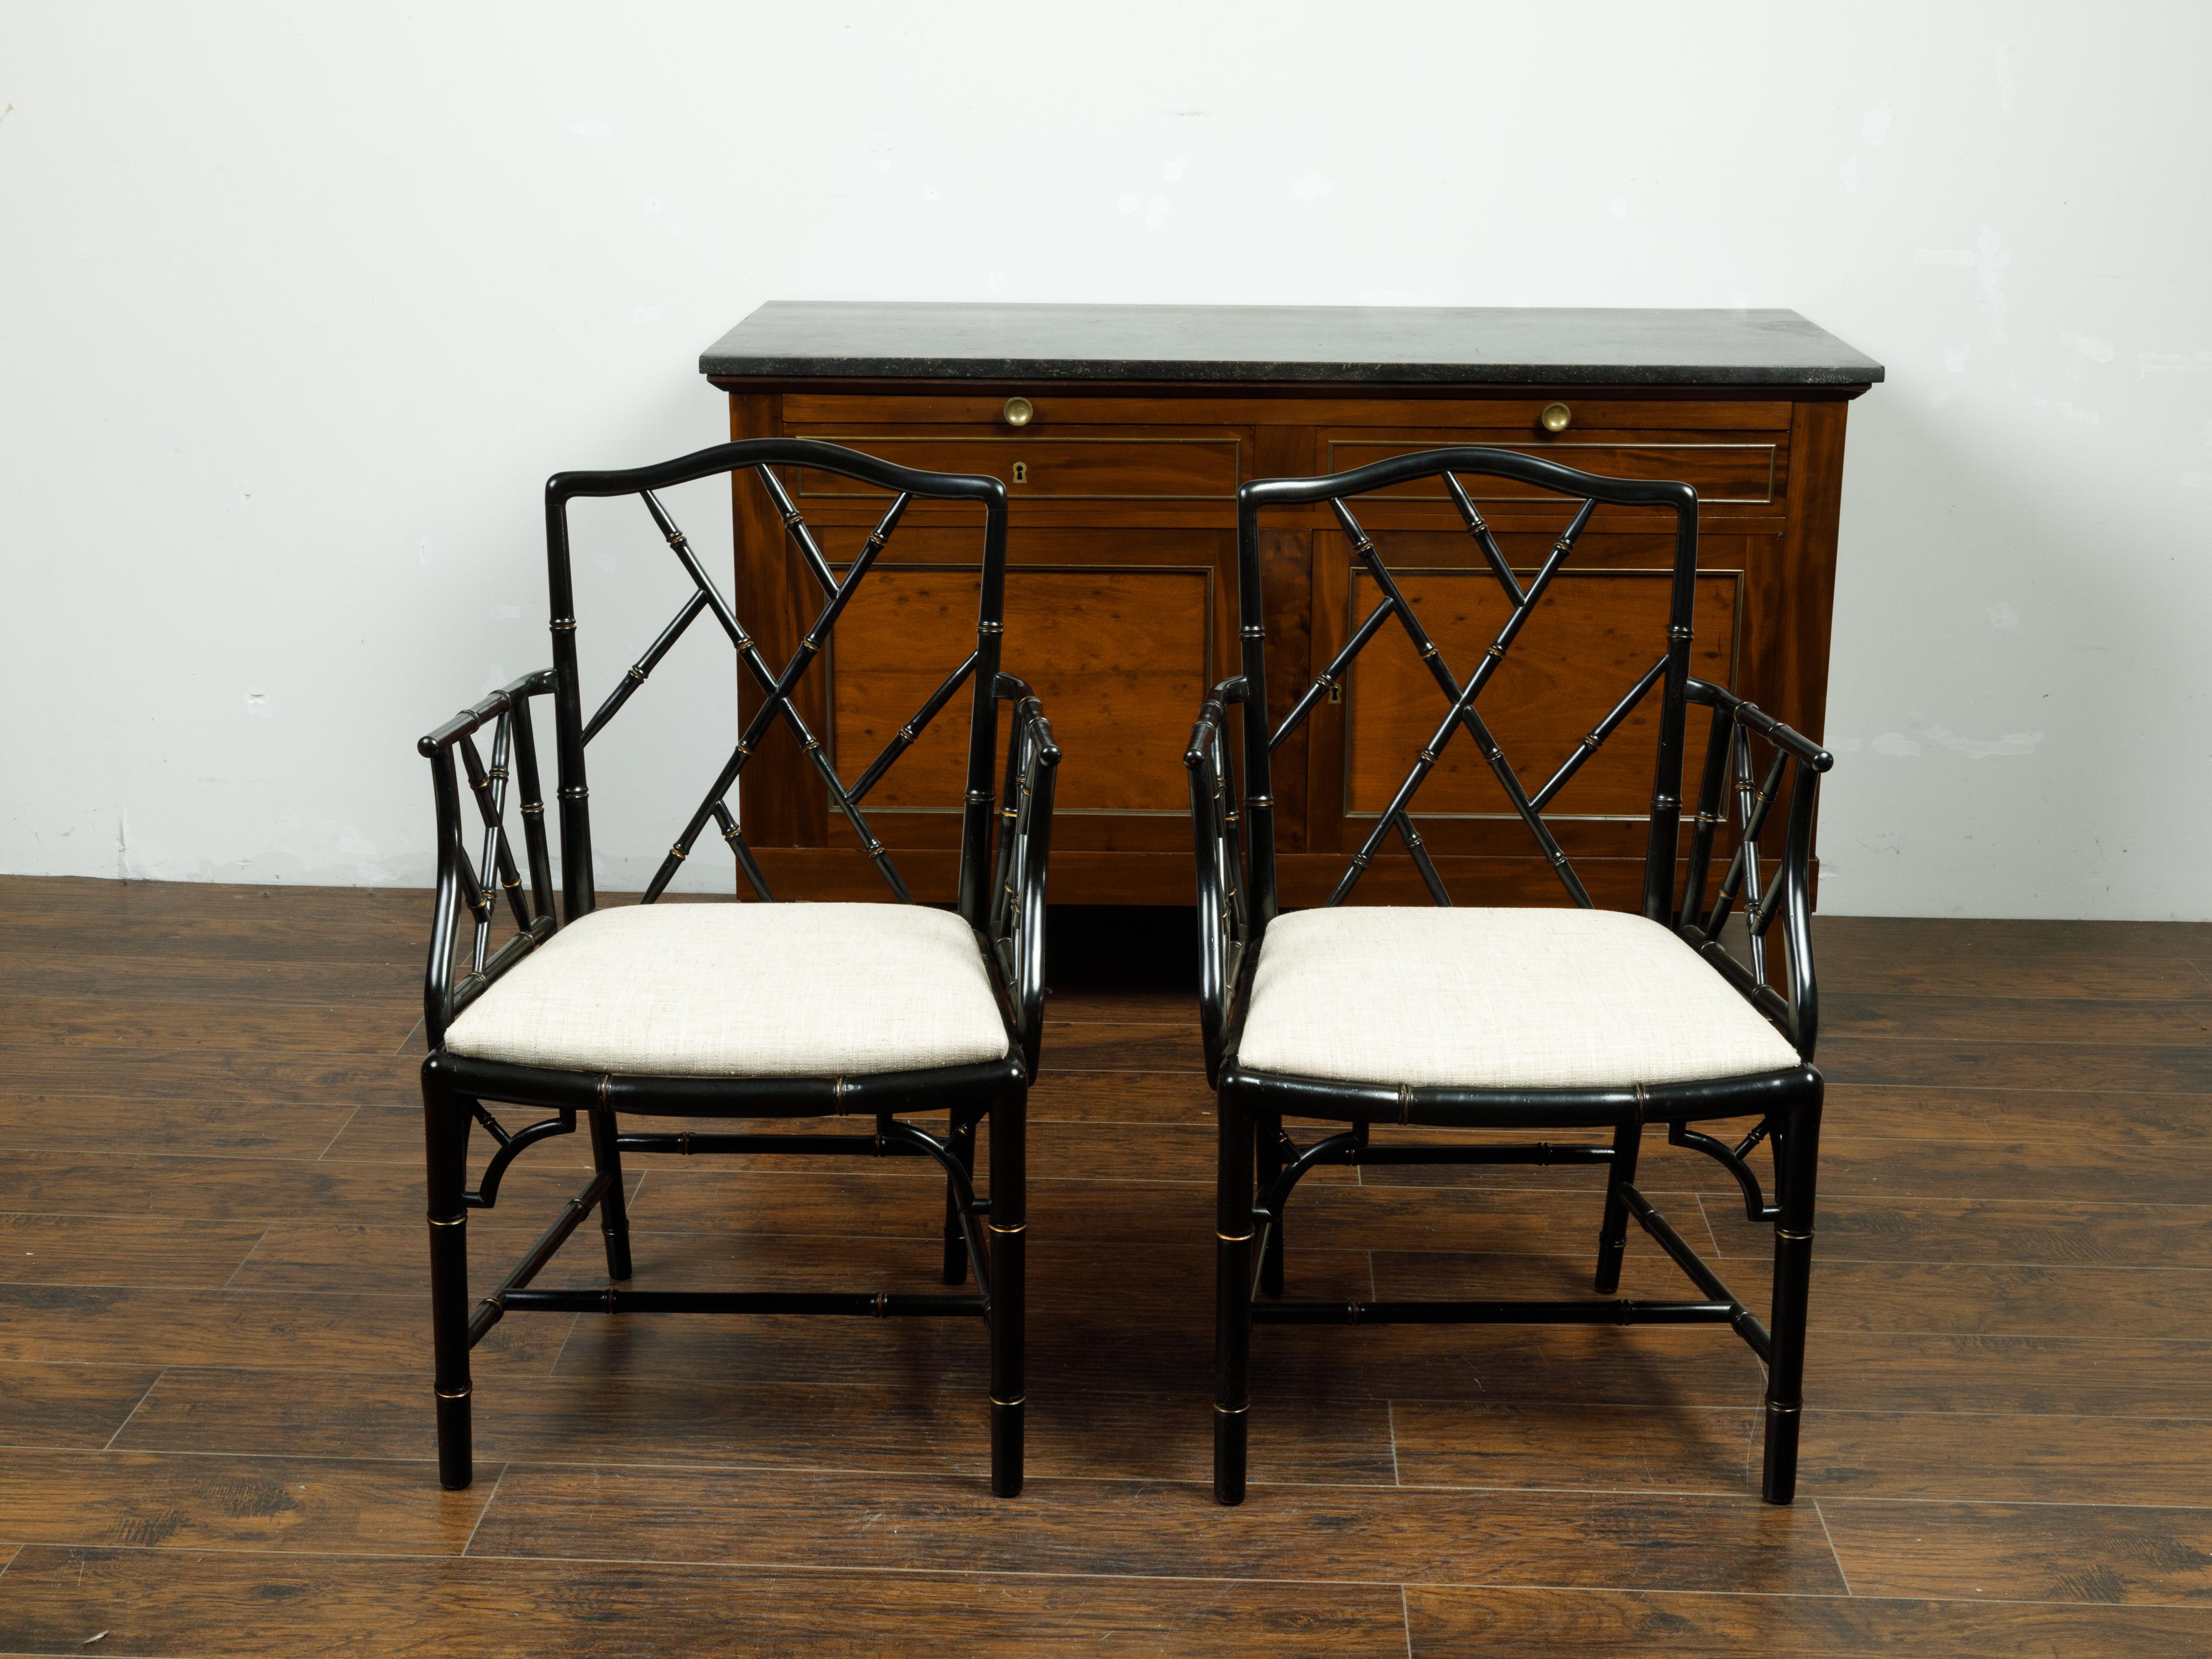 A pair of vintage Chinese Chippendale style black faux bamboo armchairs from the mid 20th century, with new upholstery. Made in the USA during the midcentury period, each of this pair of faux bamboo armchairs features a Chinese Chippendale ebonized